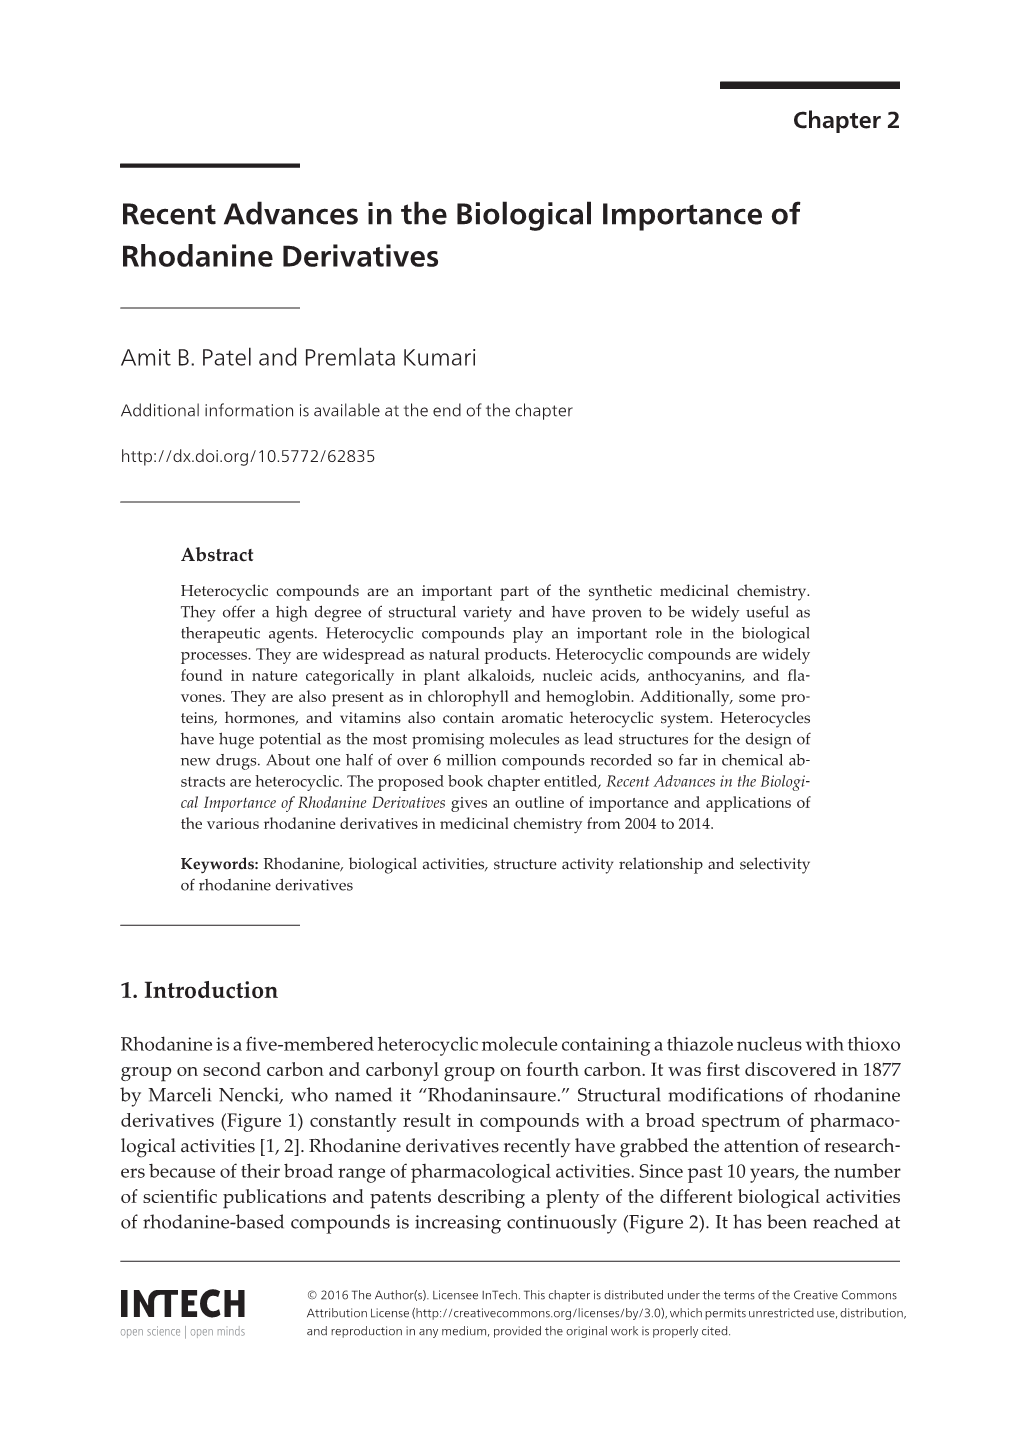 Recent Advances in the Biological Importance of Rhodanine Derivatives